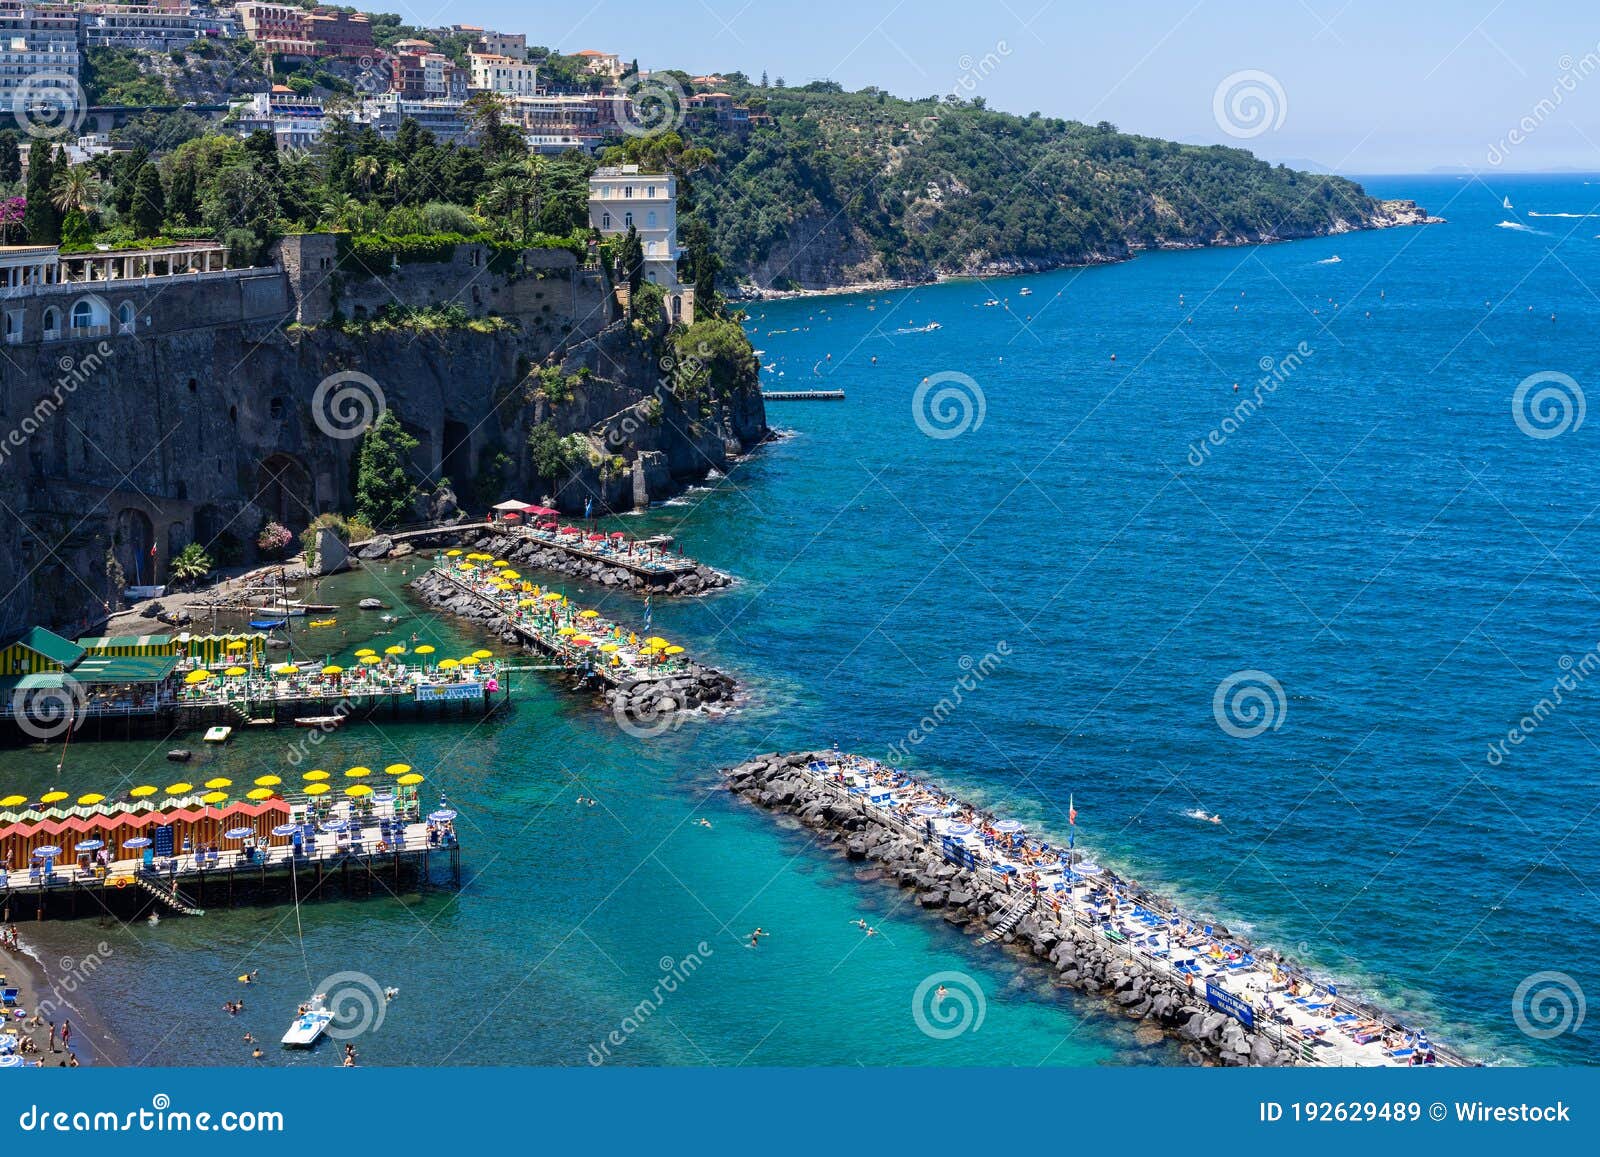 landscape of villa comunale surrounded by the sea under the sunlight in sorrento, italy